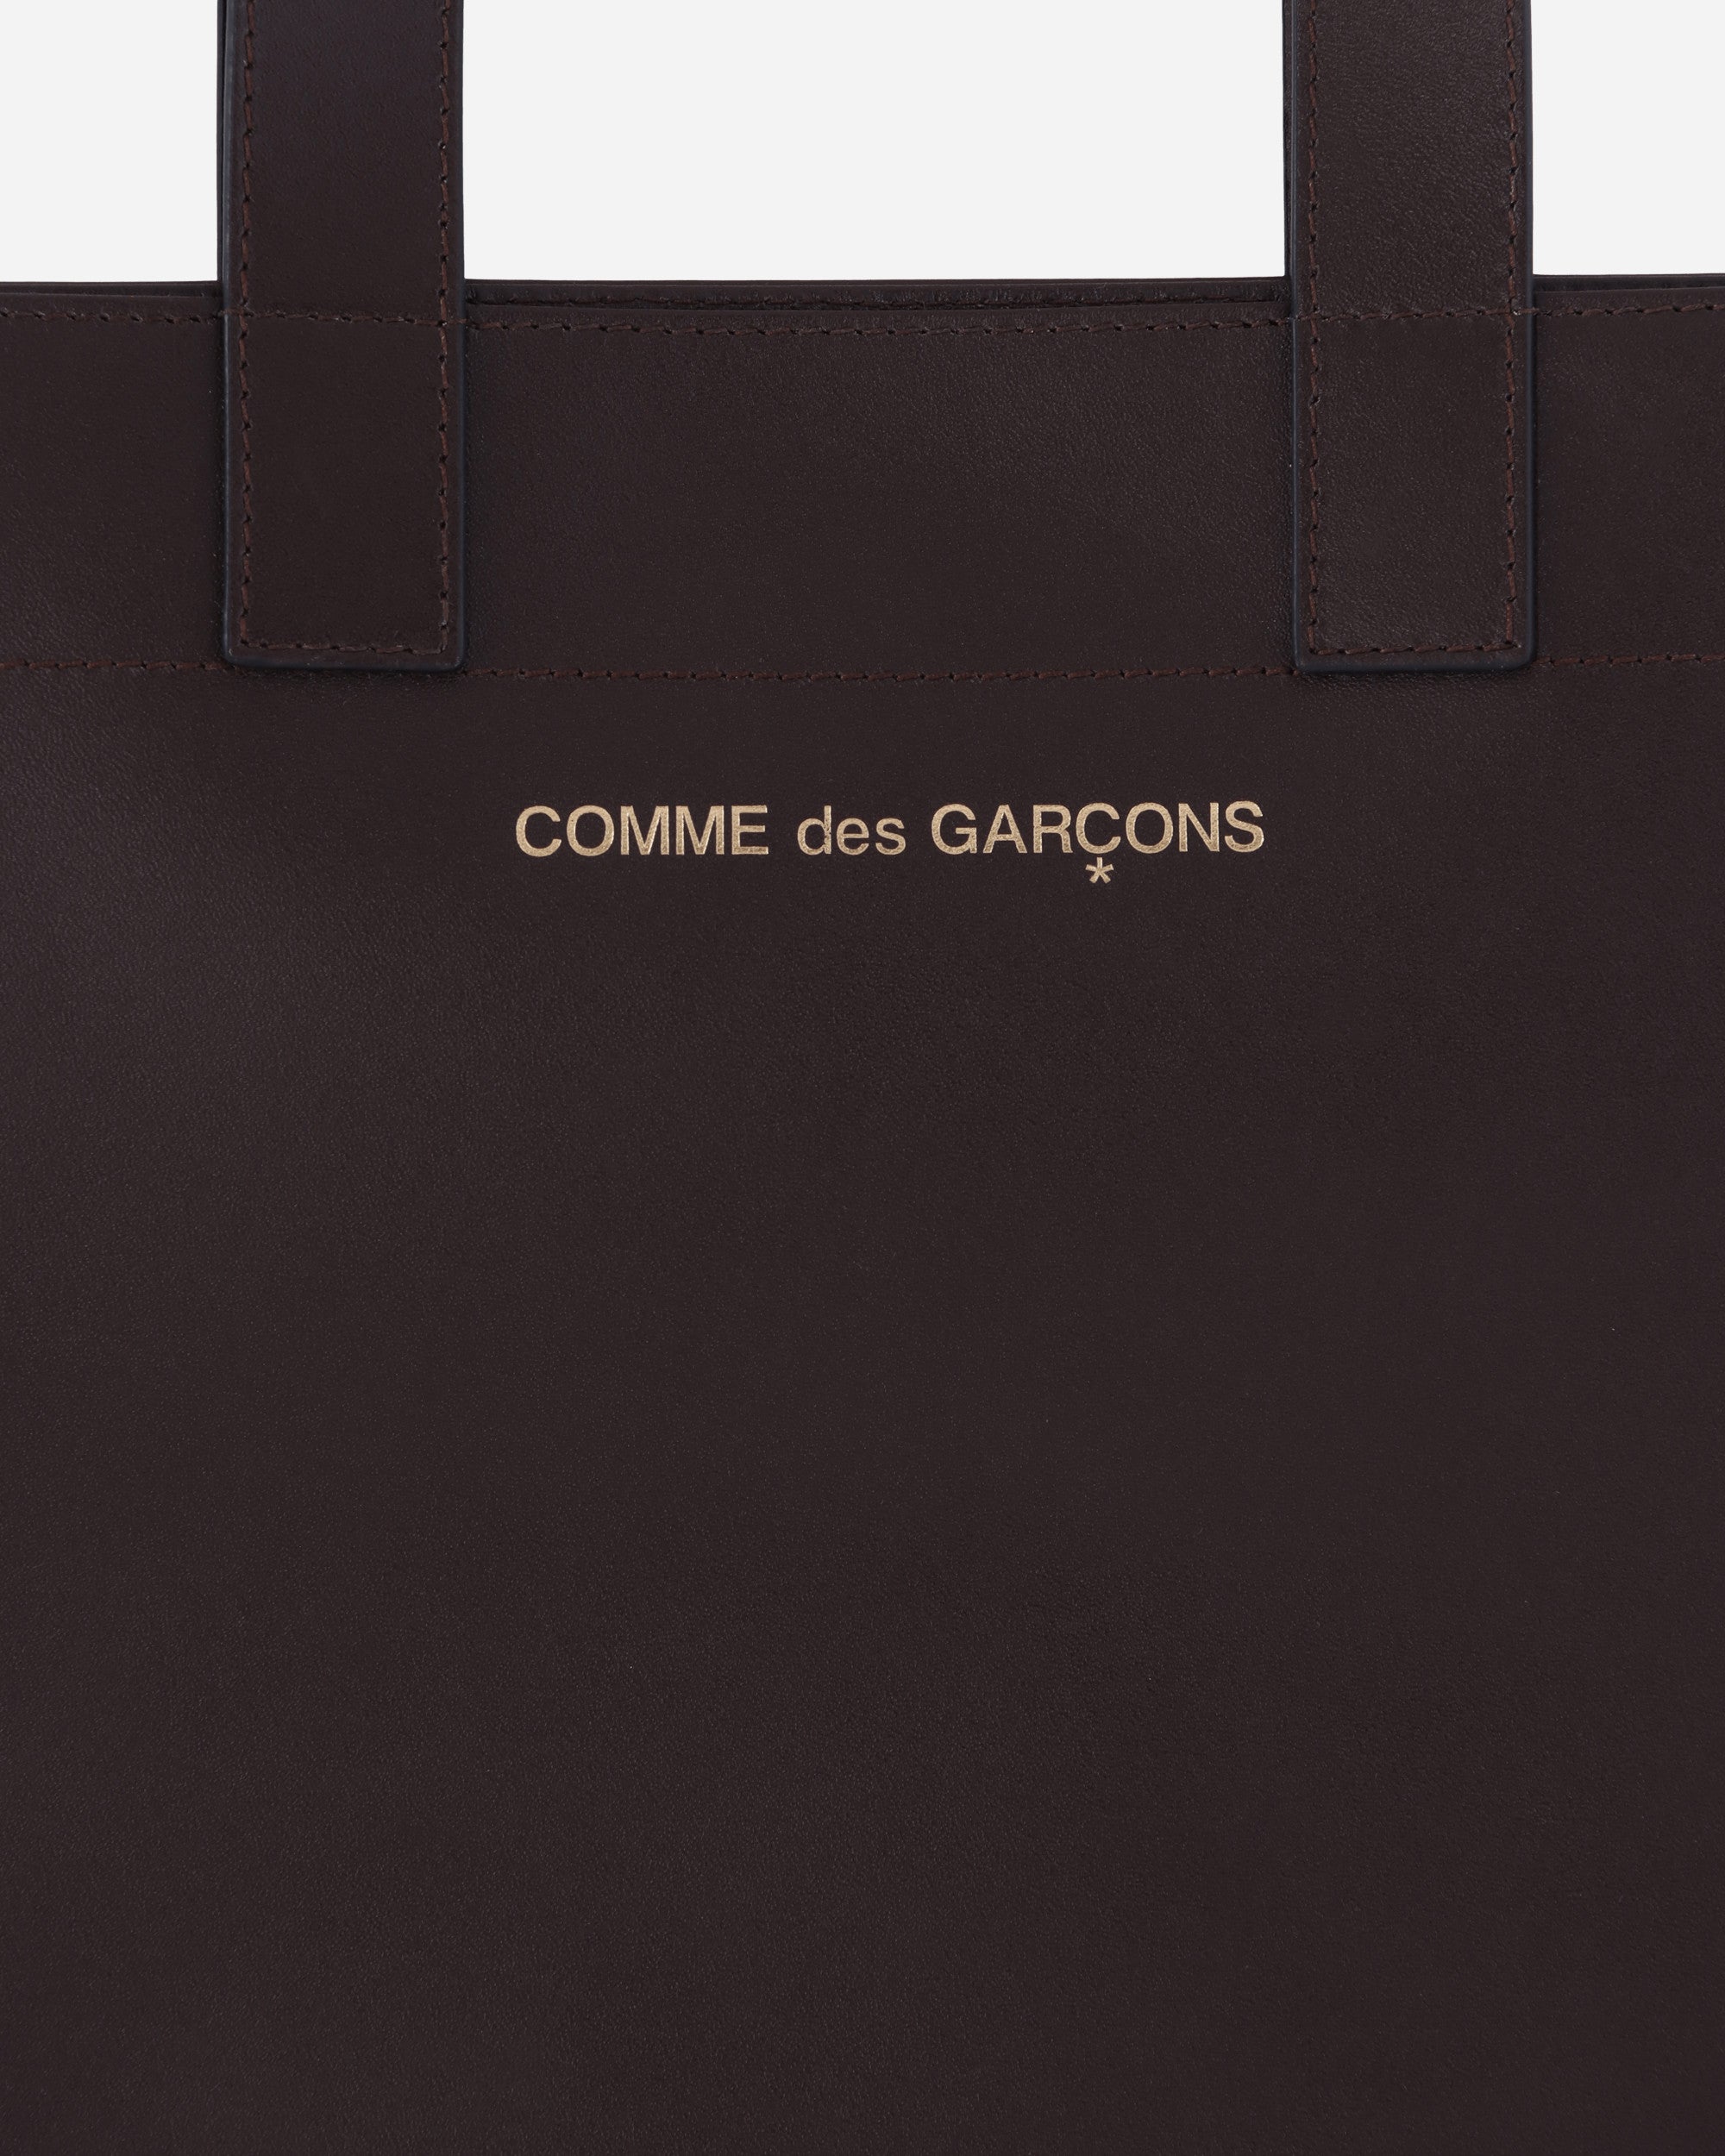 Comme Des Garçons Wallet Classic Leather Line Tote Brown Bags and Backpacks Tote SA9002 2